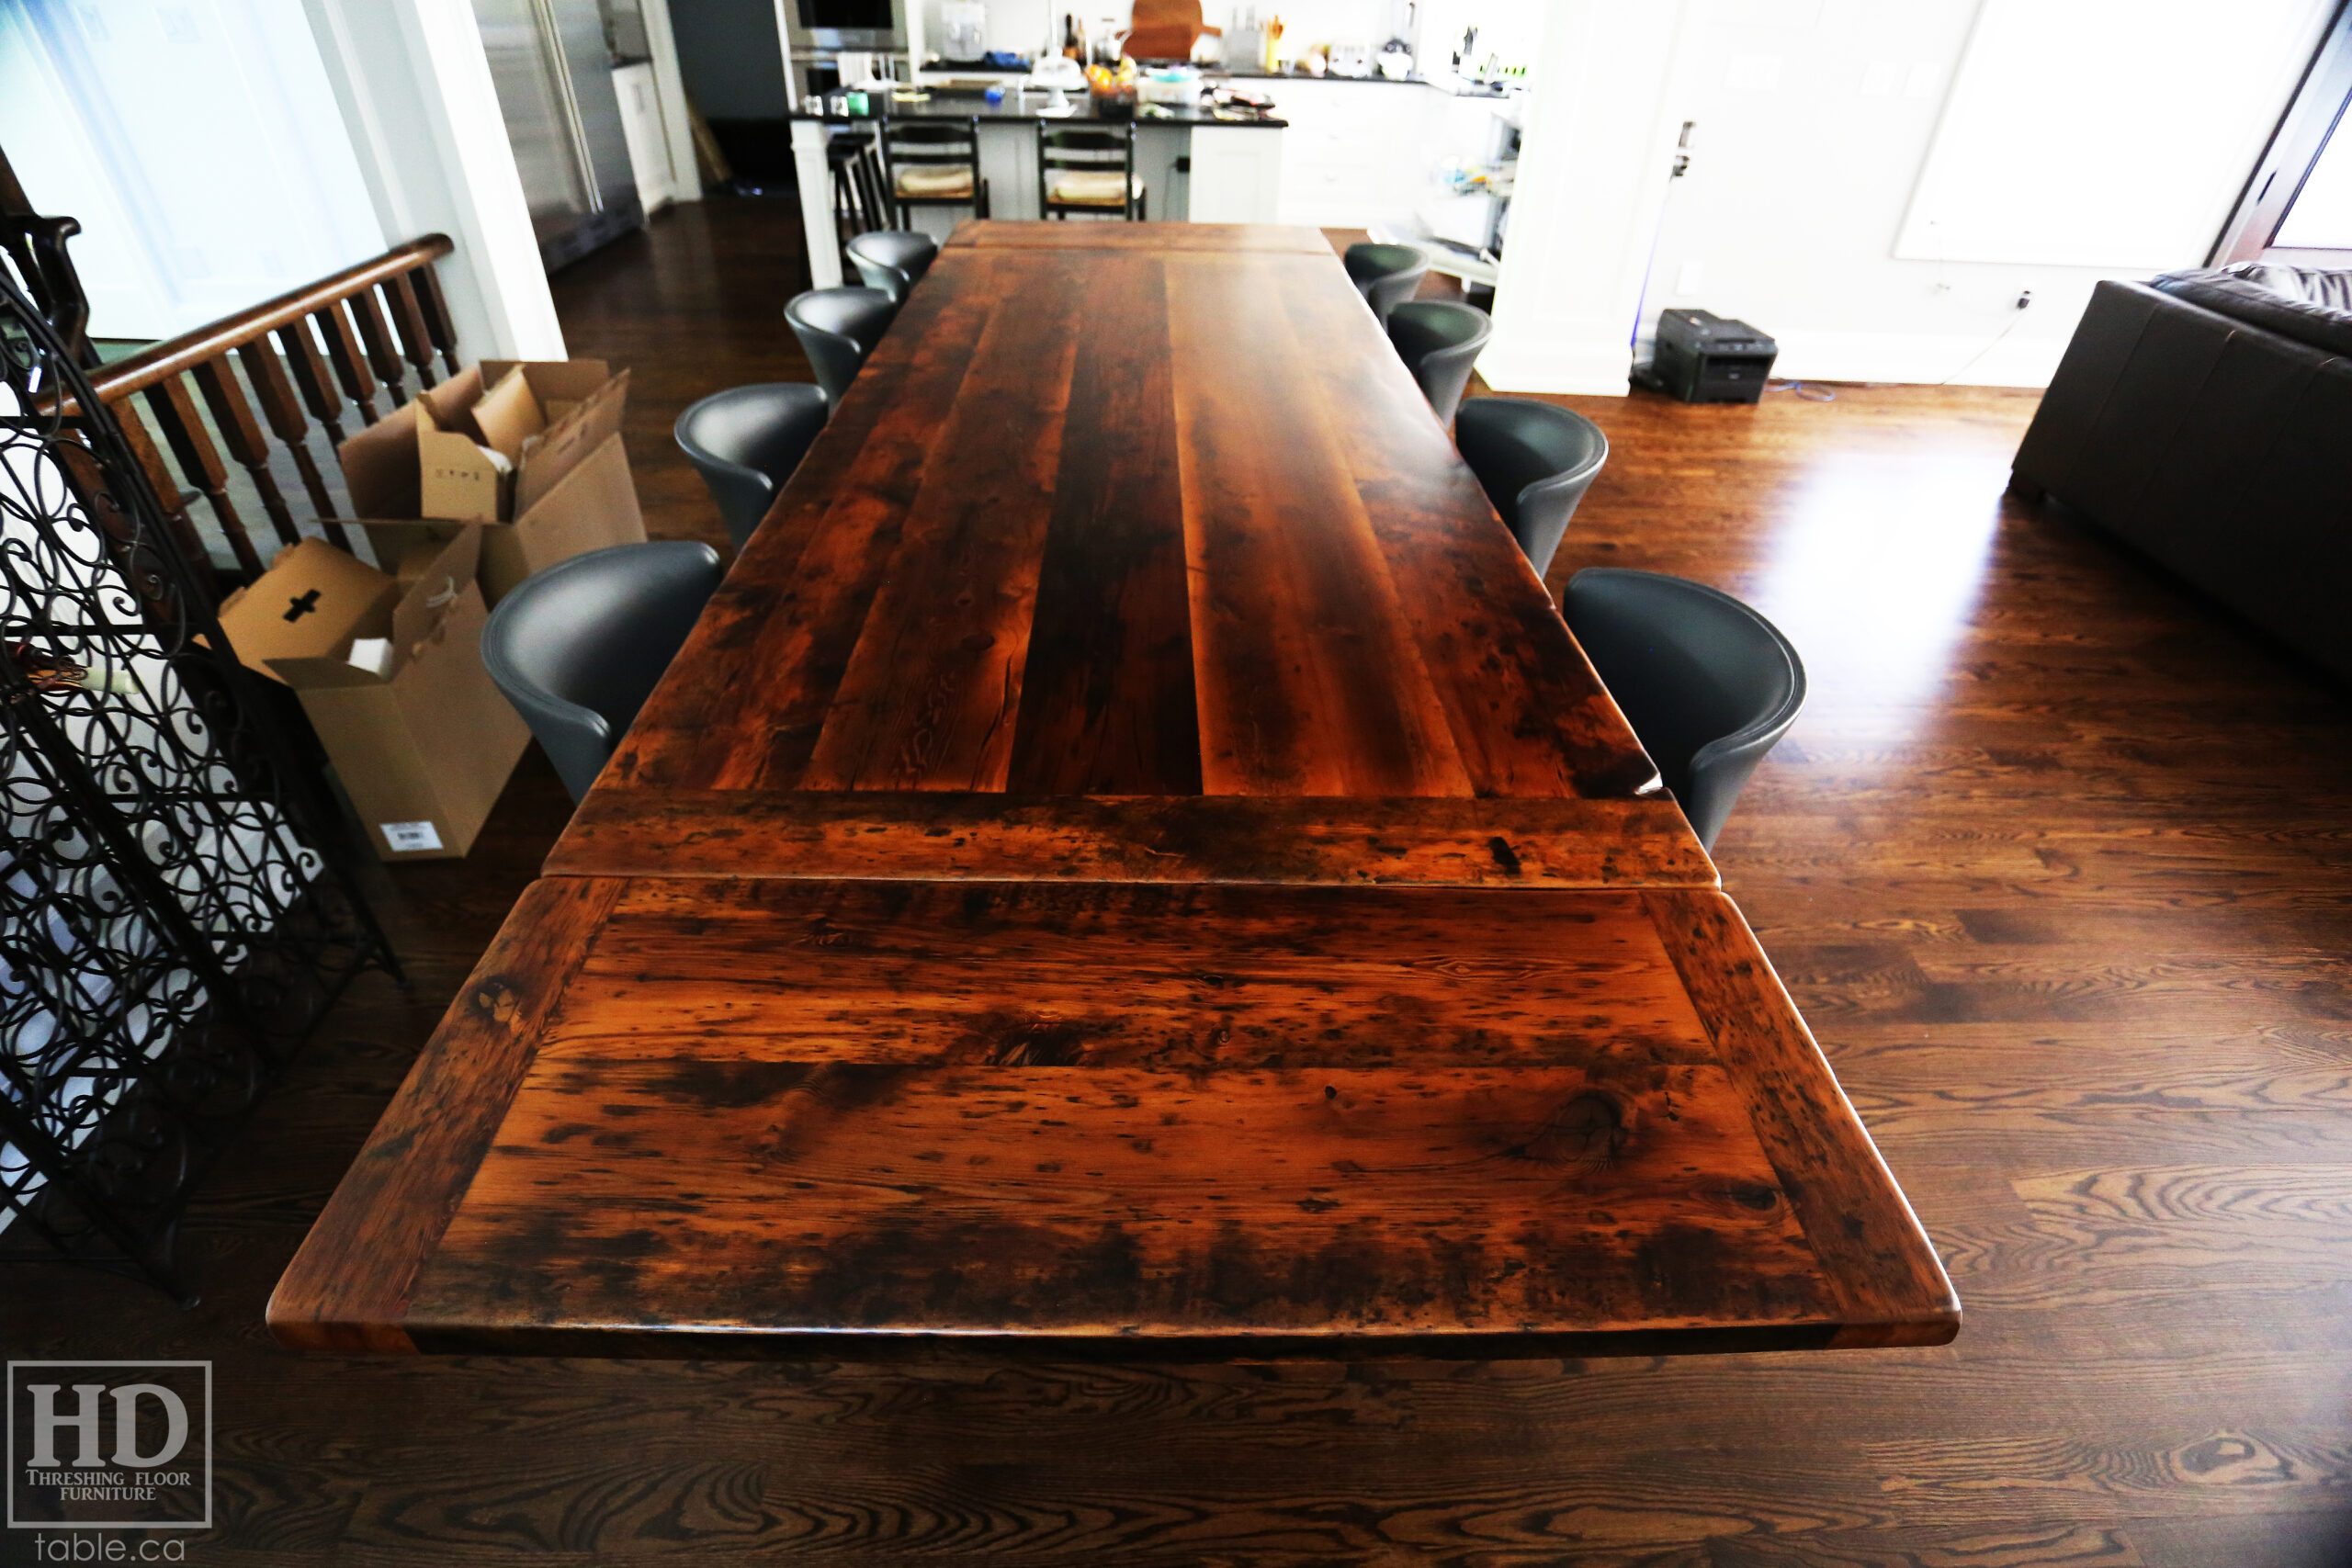 Extendable Reclaimed Wood Table made from Ontario Barnwood by HD Threshing Floor Furniture / www.table.ca